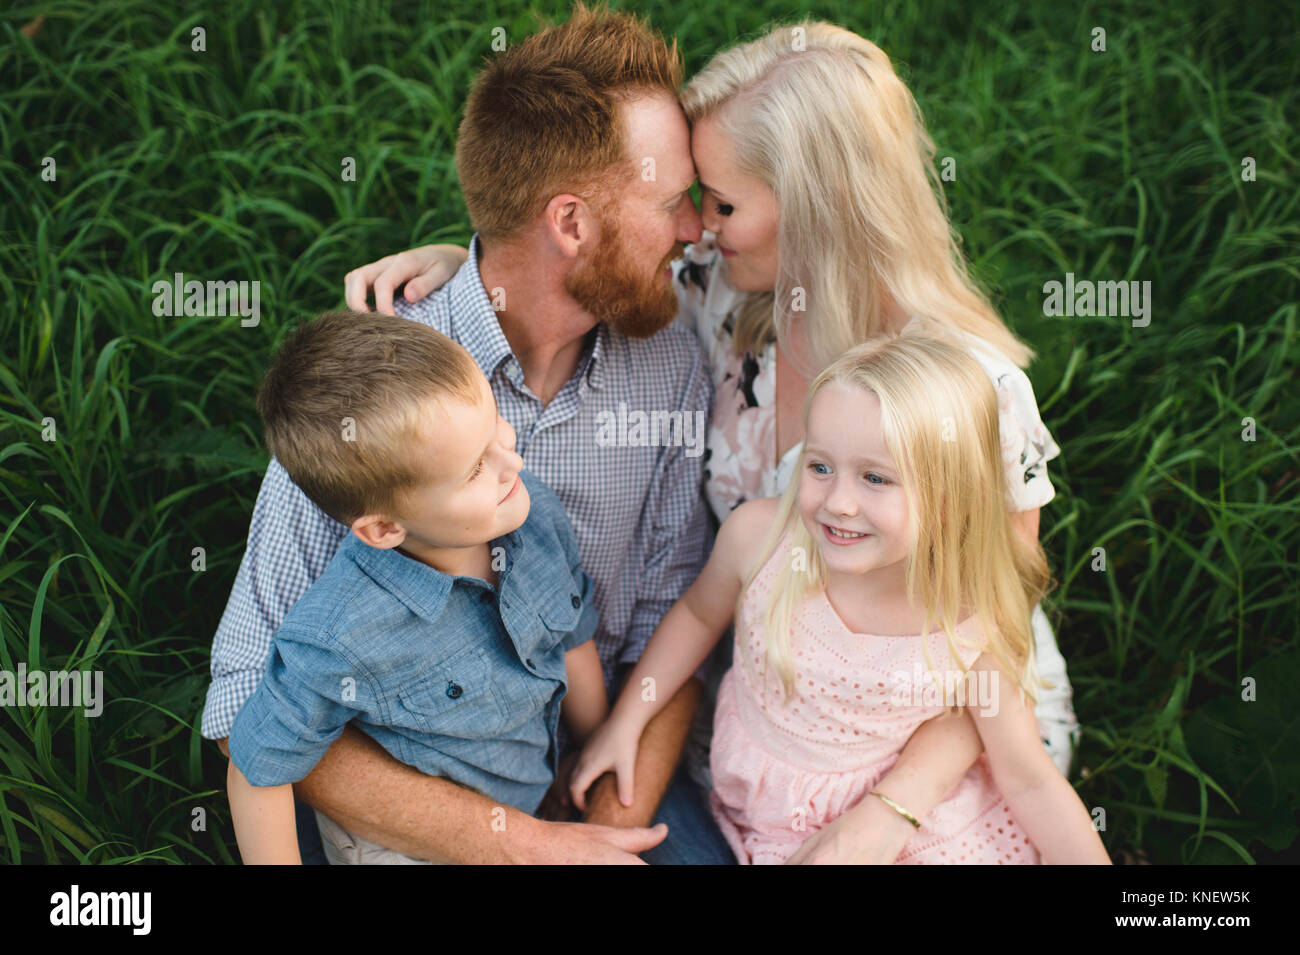 Family sitting together on grass Stock Photo